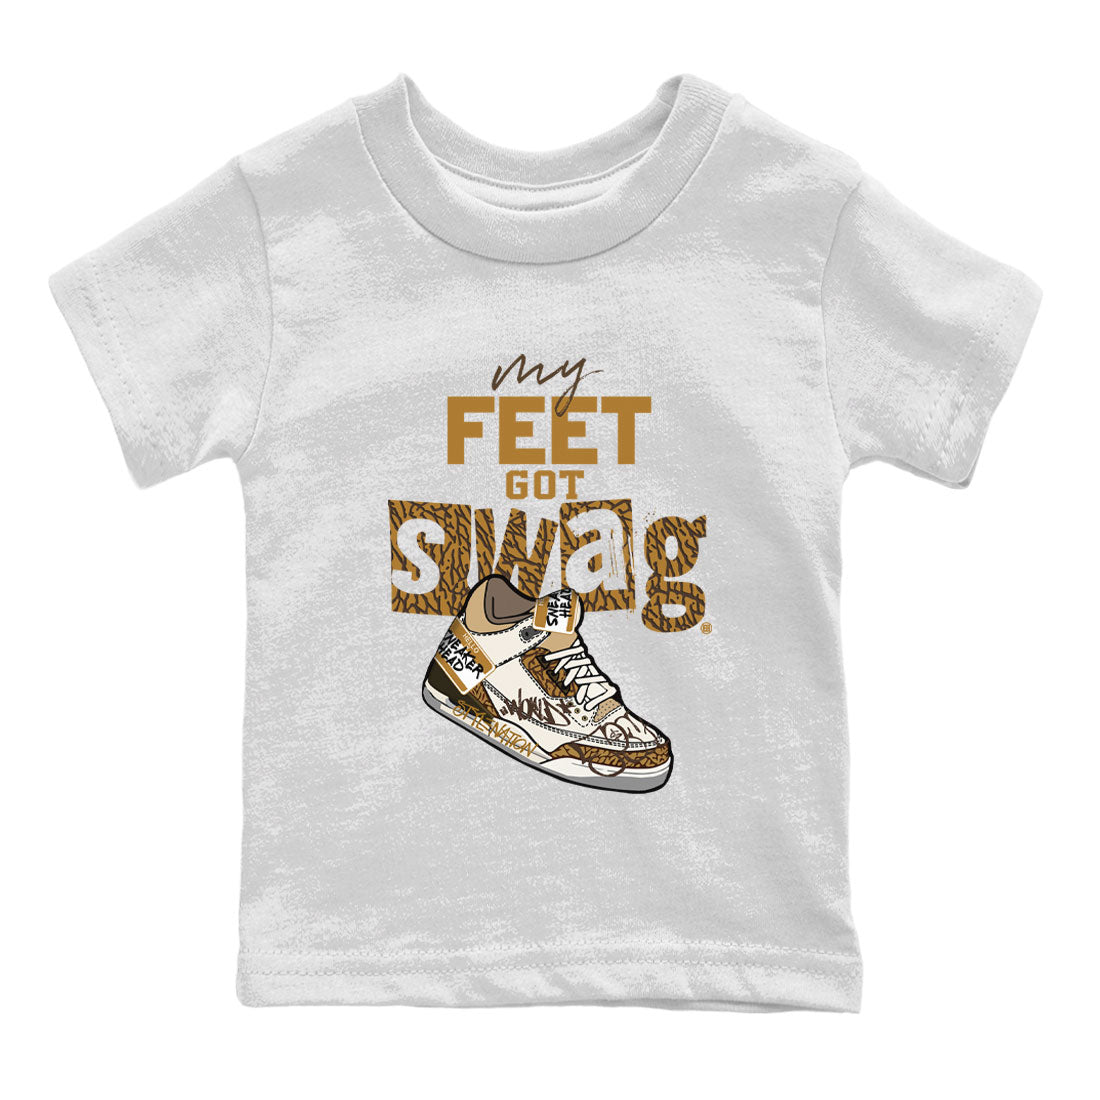 baby boys with swag and jordans